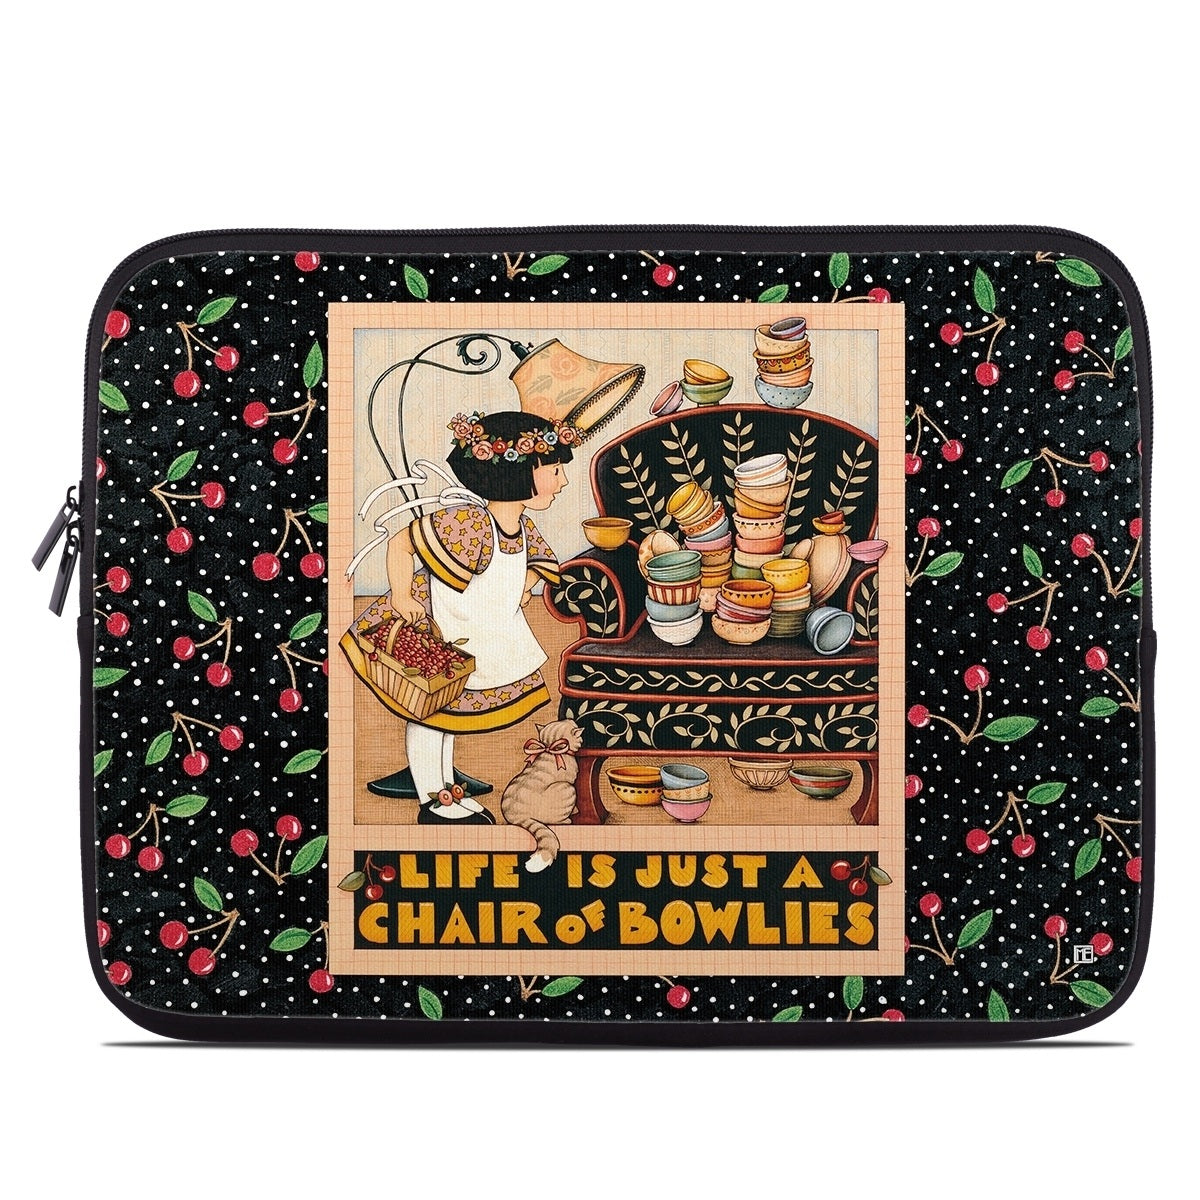 Chair of Bowlies - Laptop Sleeve